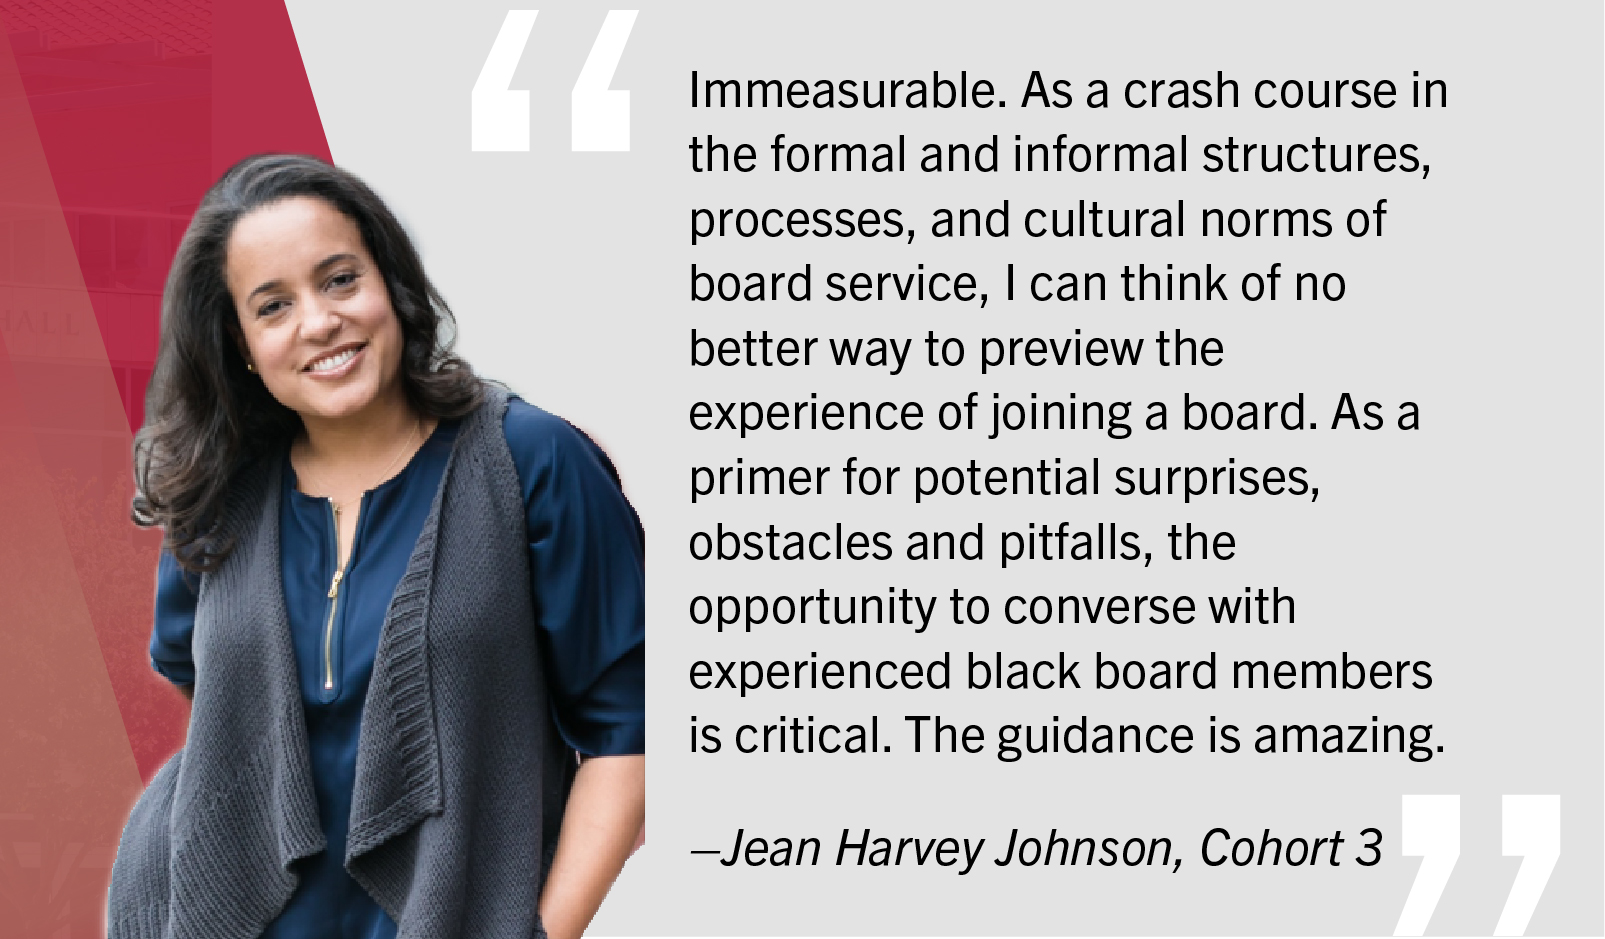 Quote by Jean Harvey Johnson, Cohort 3